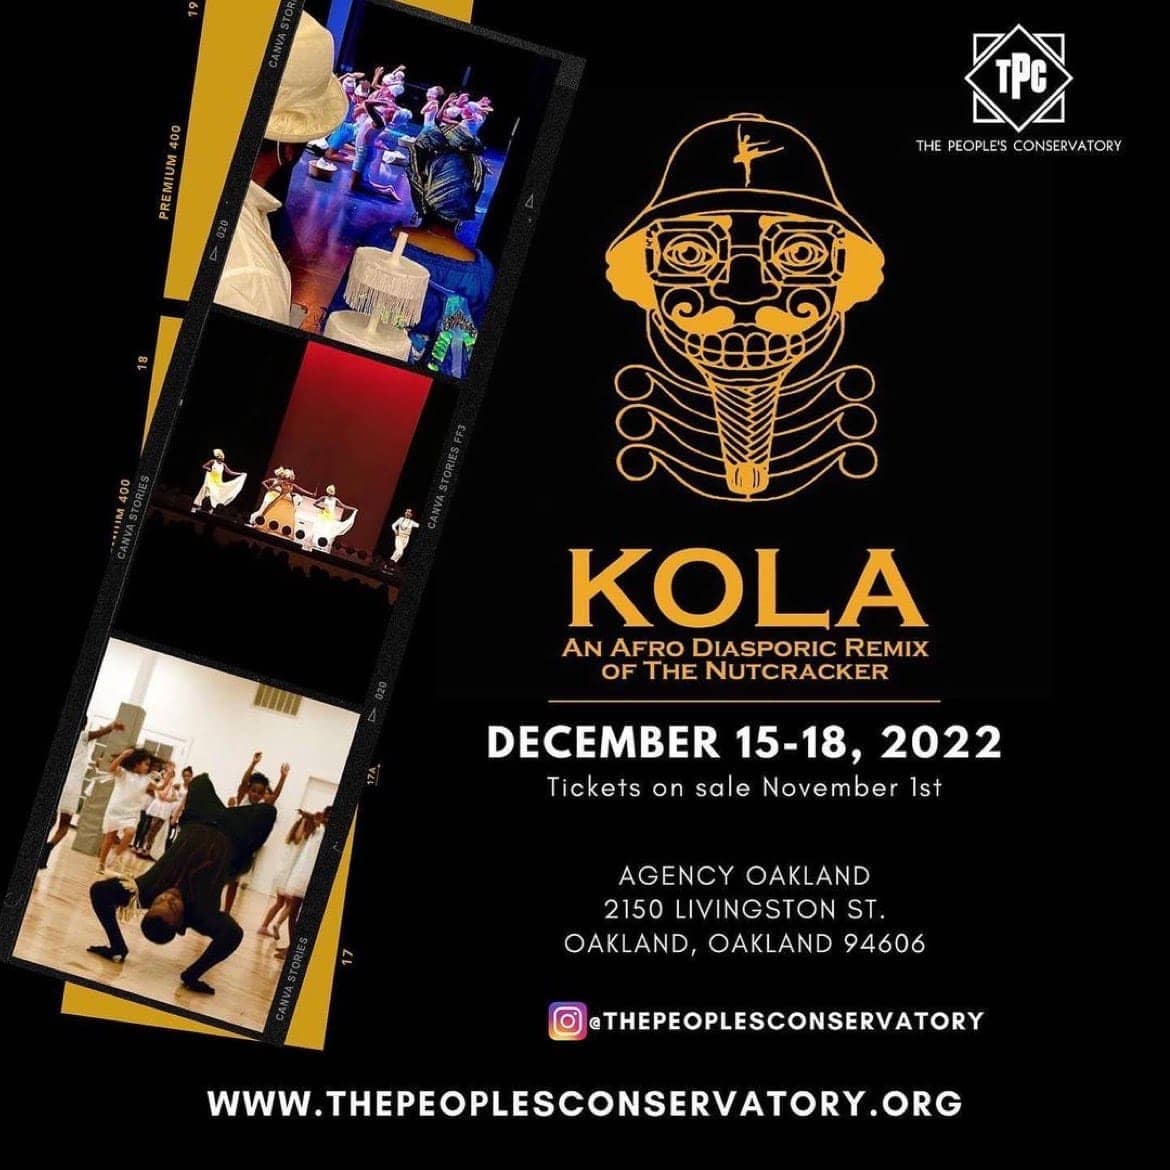 KOLA-by-Peoples-Conservatory-1215-1822-poster, Youth driven ‘KOLA’ aka ‘Black Nutcracker’ returns after pandemic hiatus, Culture Currents Local News & Views 